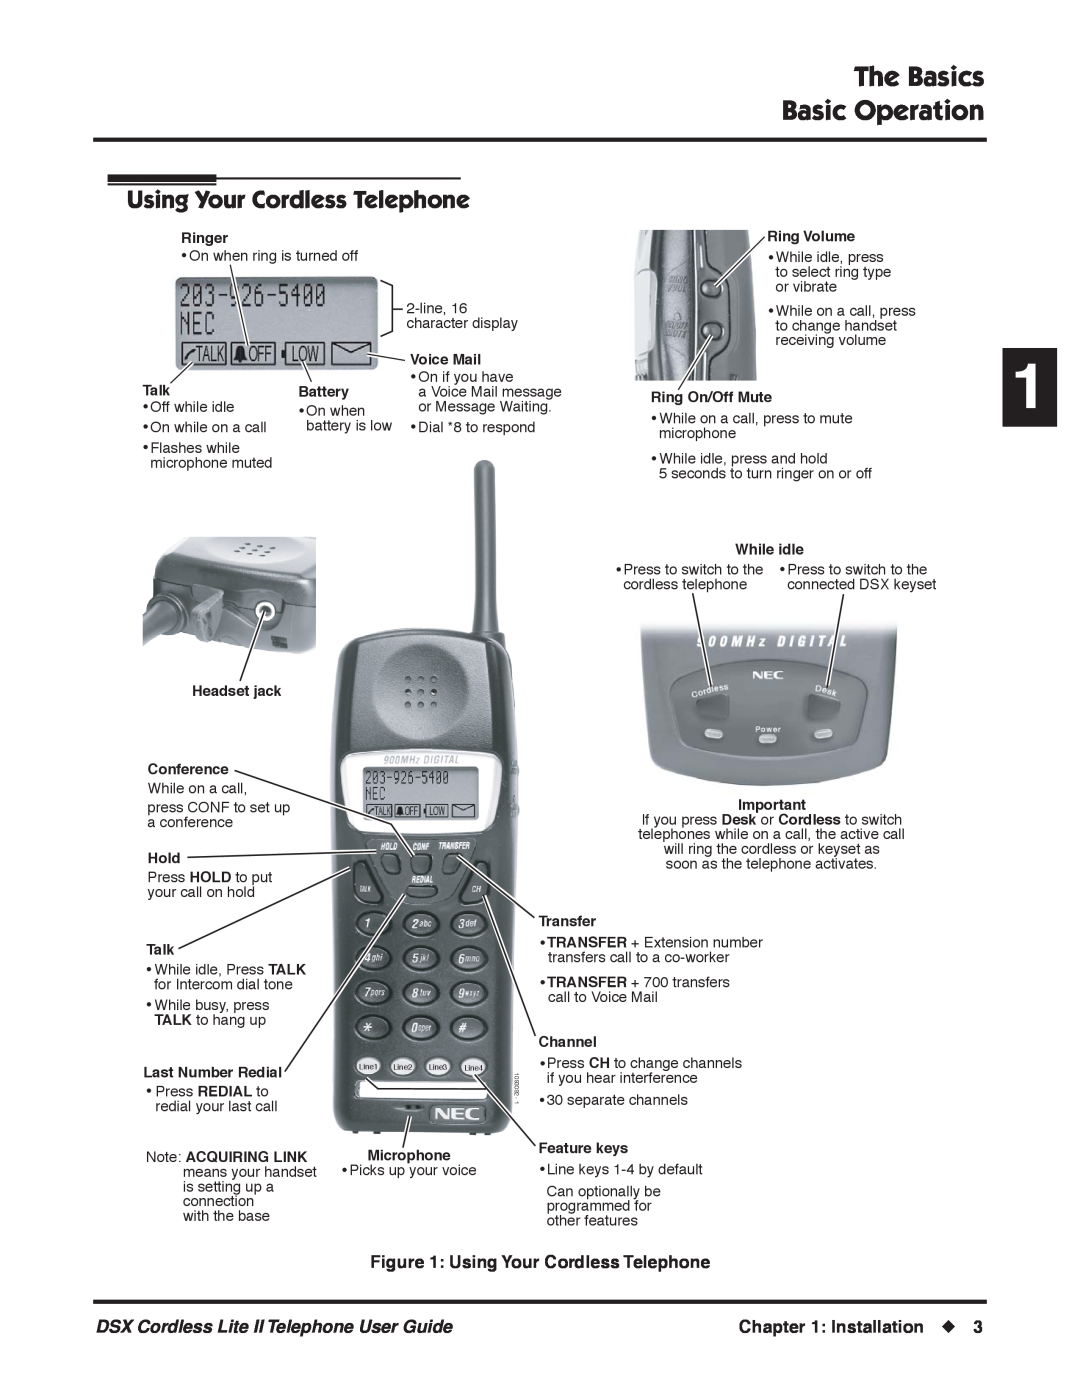 NEC N 1093092, P manual Using Your Cordless Telephone, The Basics Basic Operation, DSX Cordless Lite II Telephone User Guide 